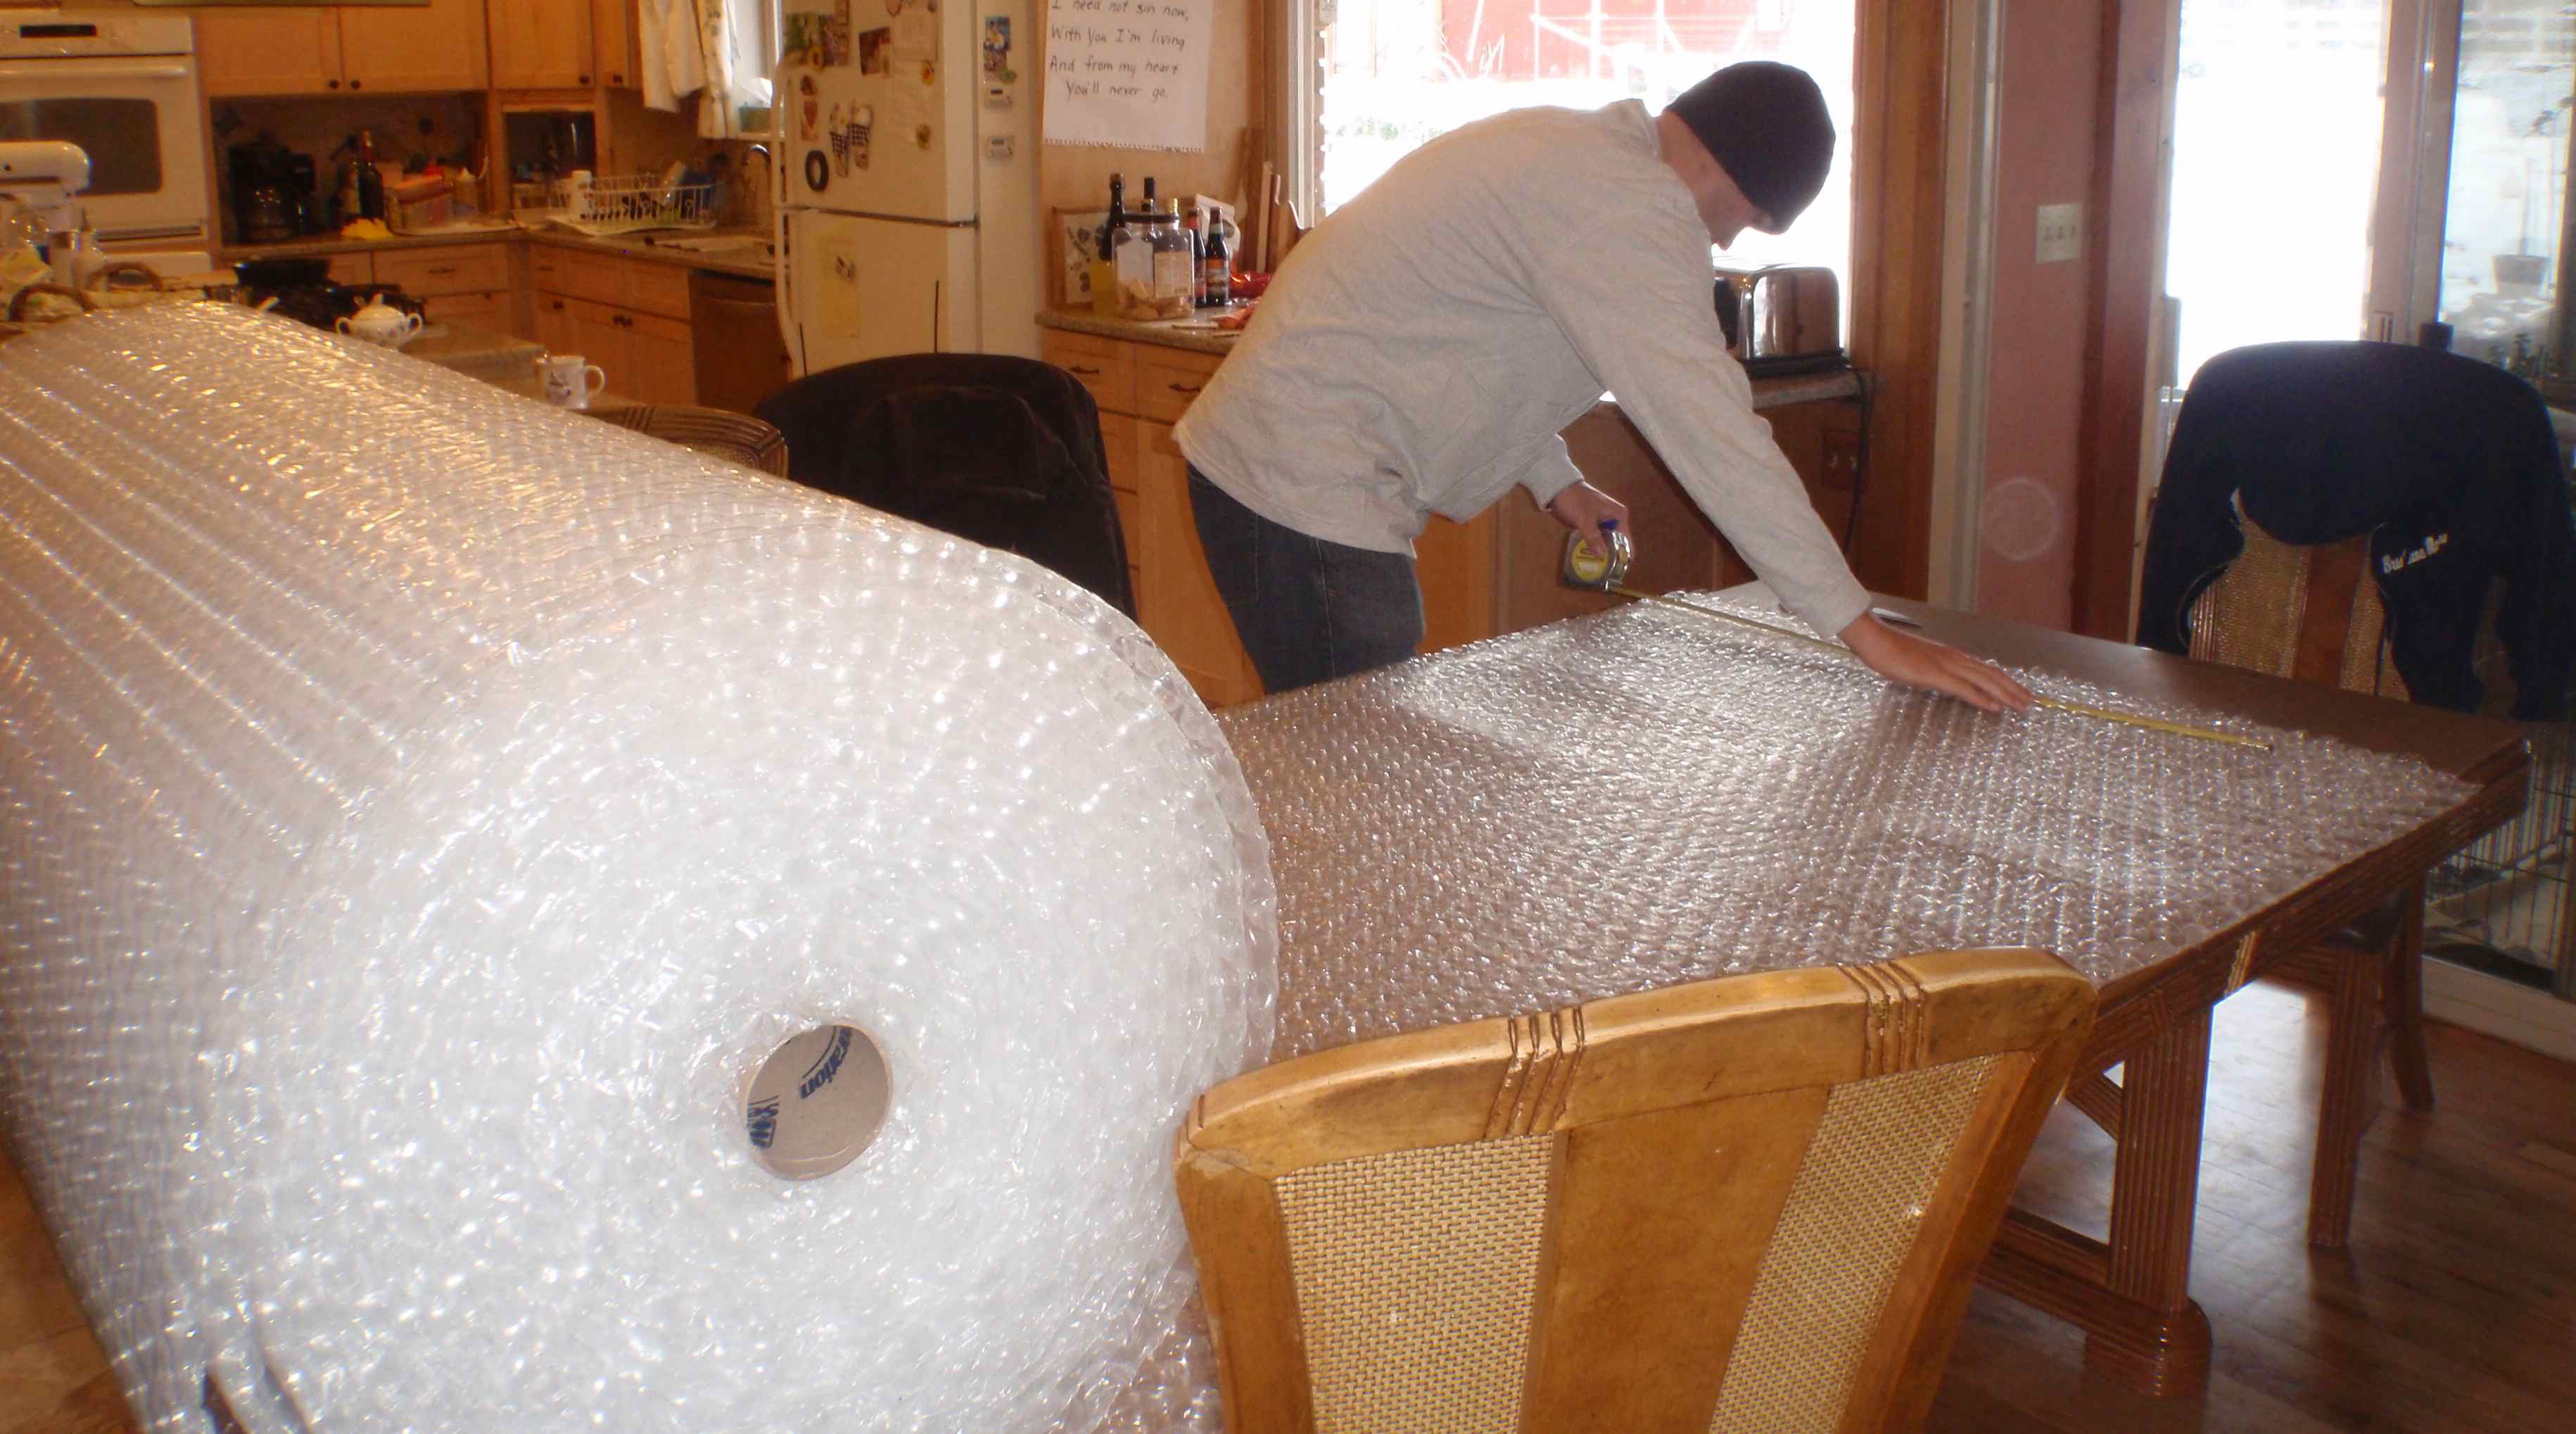 where can i buy a big roll of bubble wrap